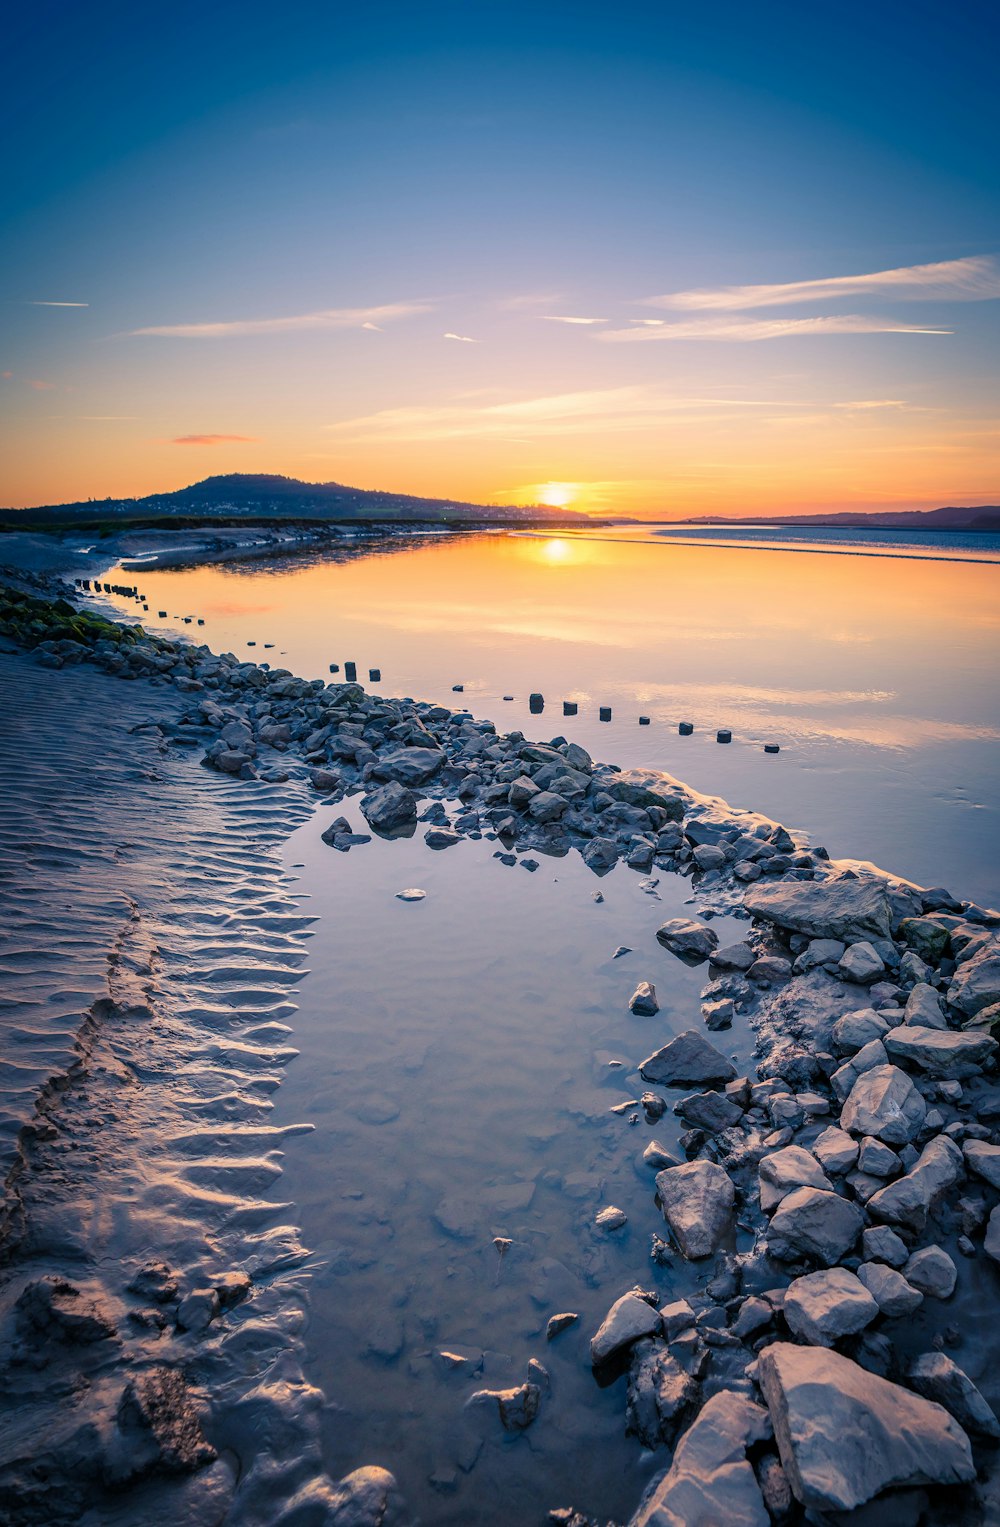 a body of water with rocks and a sunset